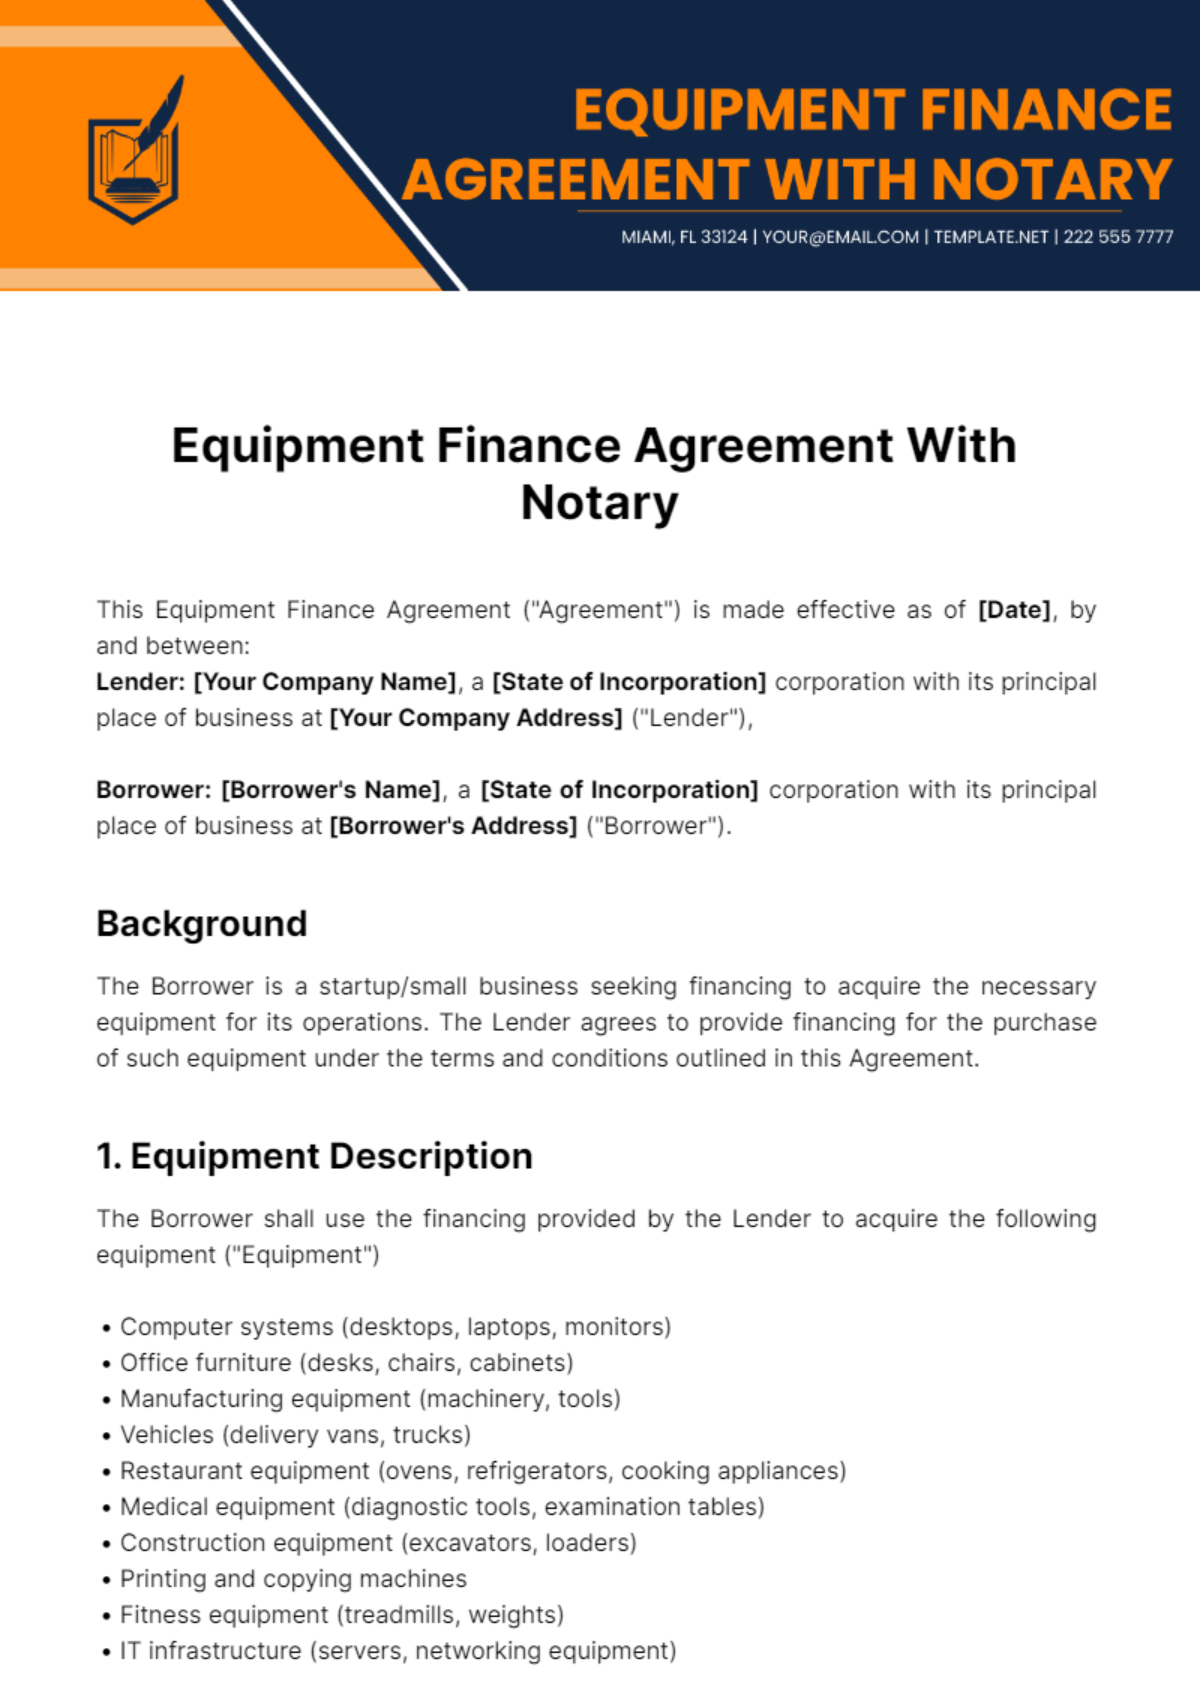 Equipment Finance Agreement With Notary Template